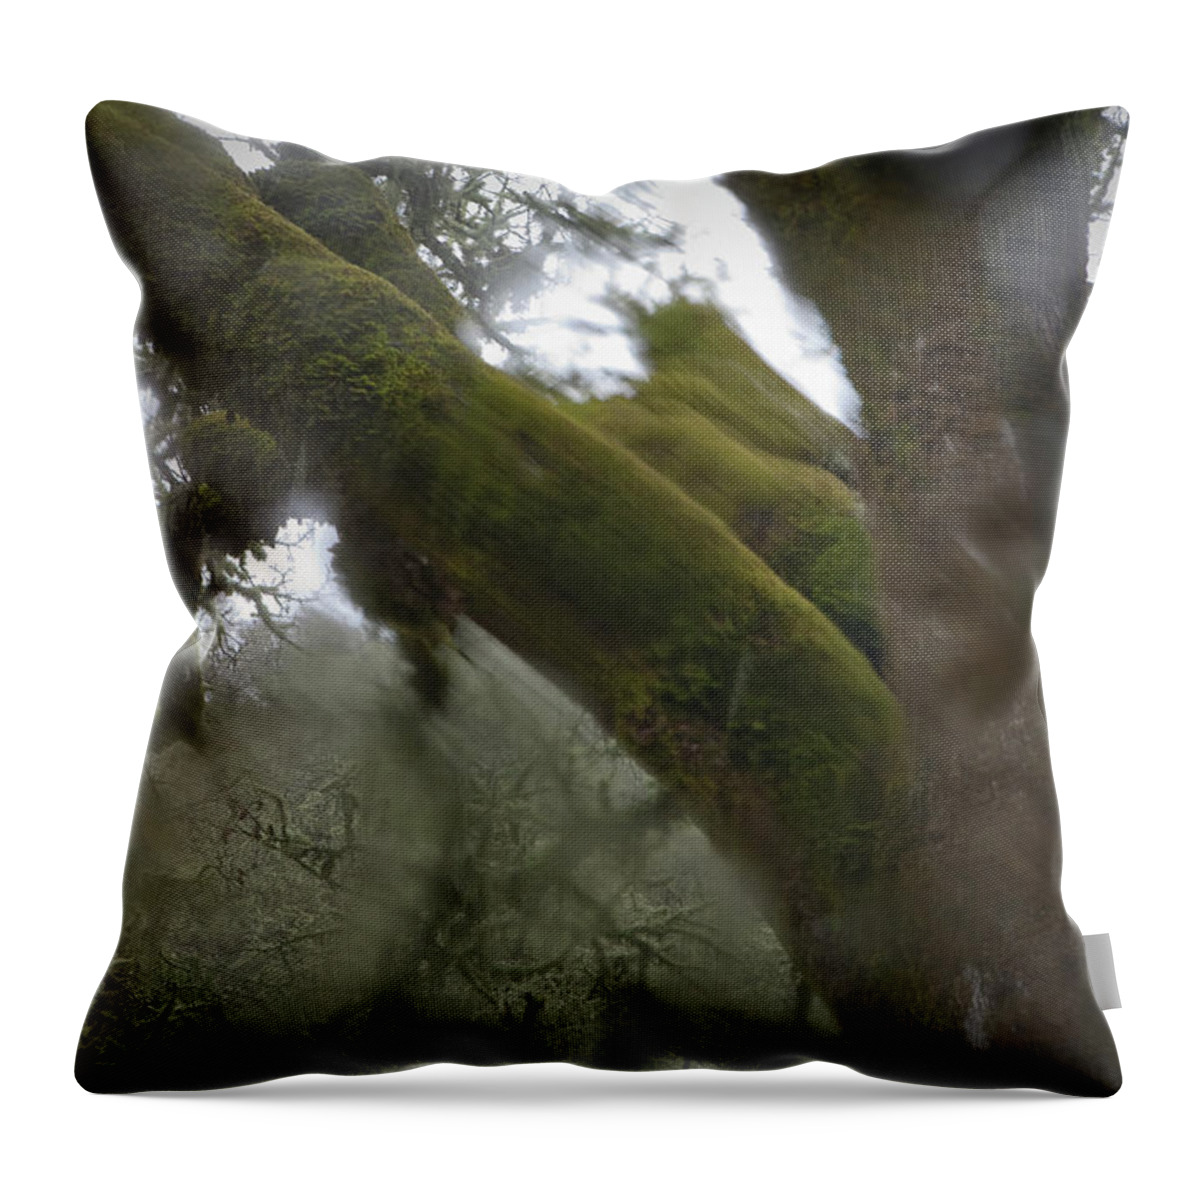 Horror Throw Pillow featuring the photograph Trees Through Car Windshield In Rain by Diane Miller